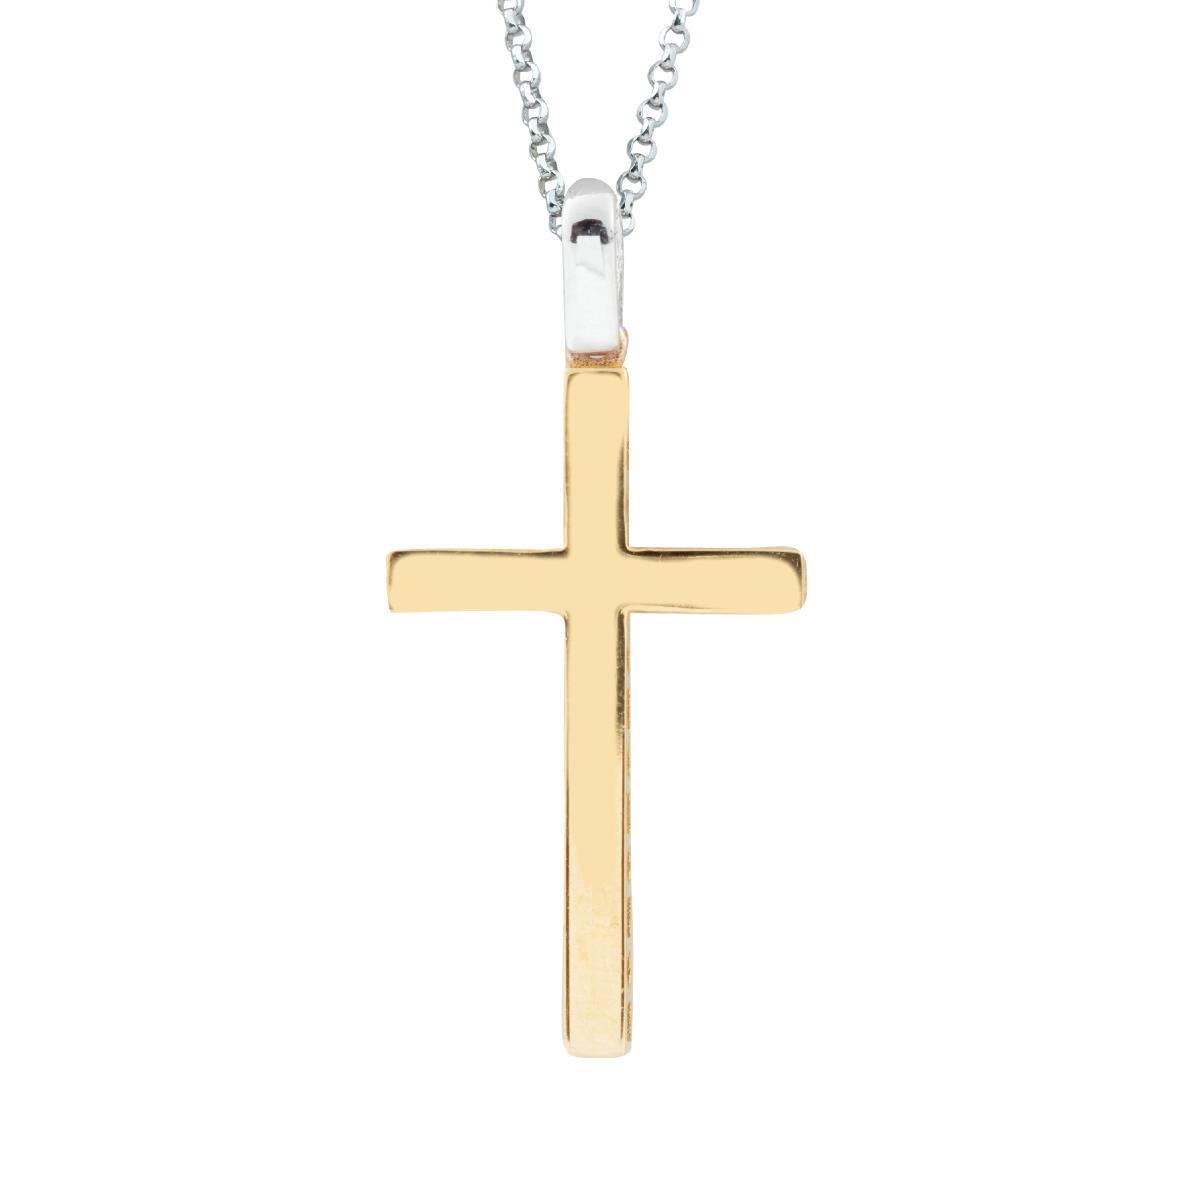 Necklace with white gold chain and 18kt yellow gold cross - CEA2476-LO